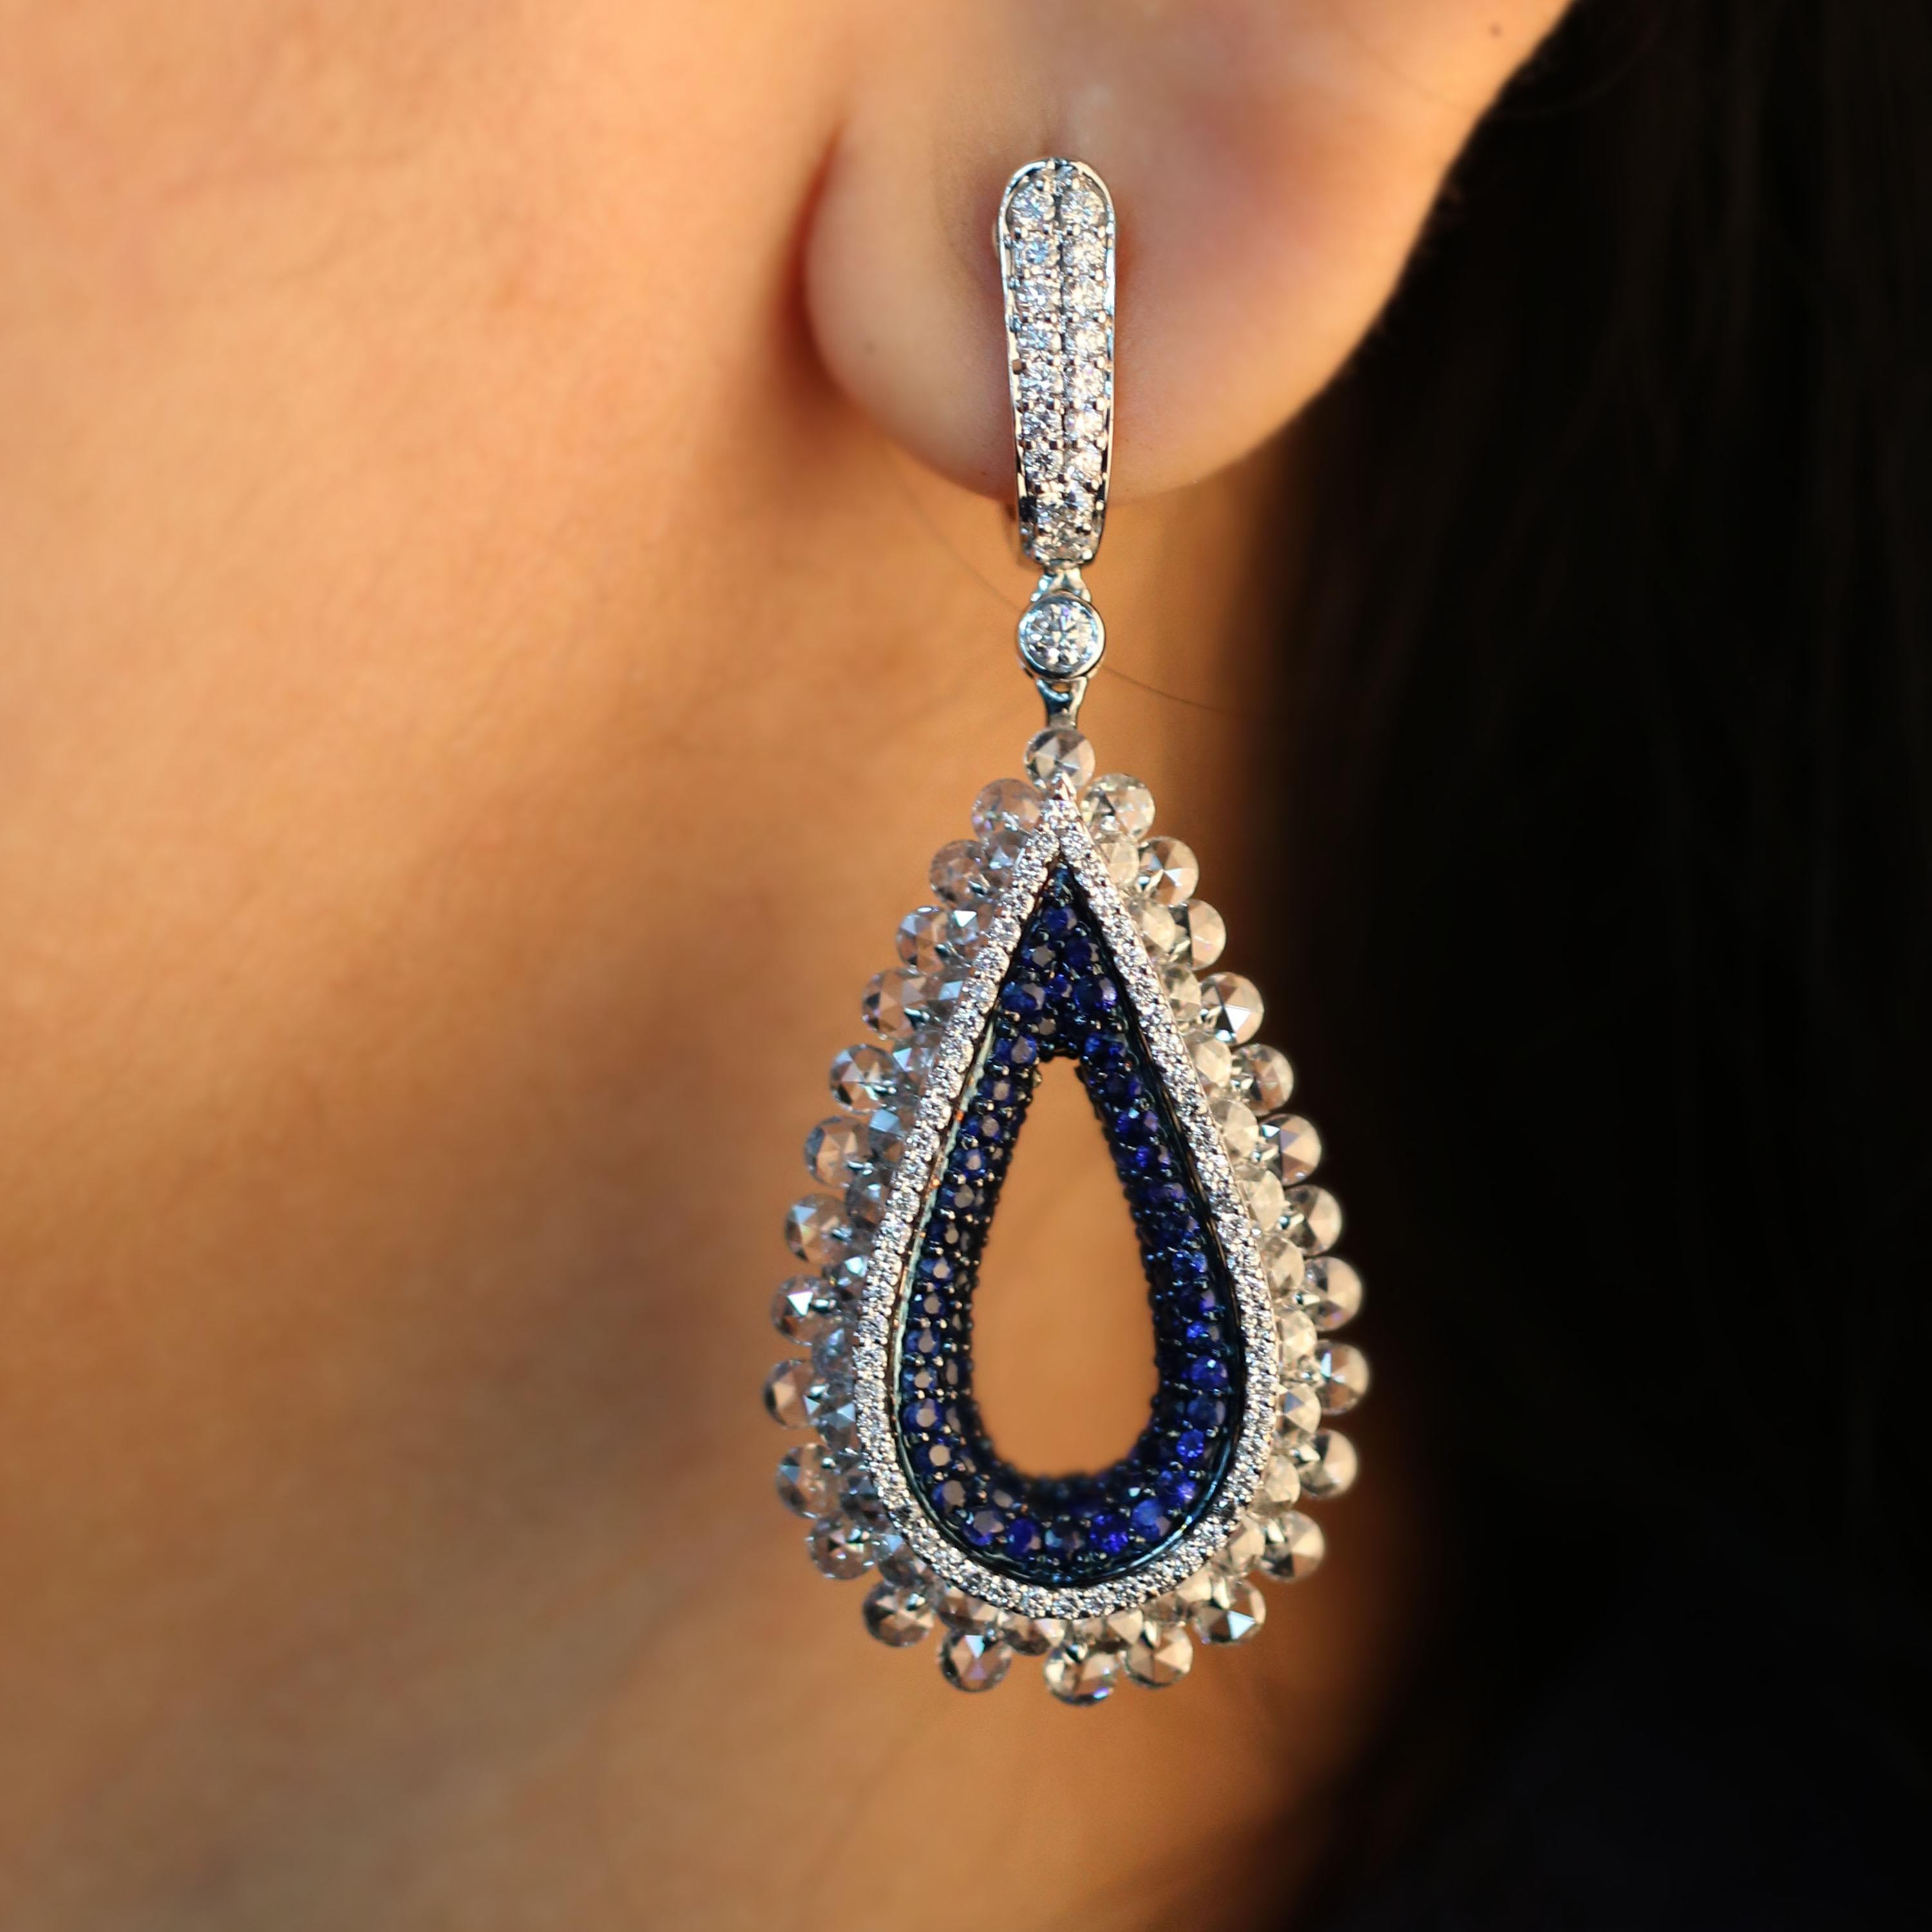 Diamond Weight: 7.23 cts
Blue Sapphire Weight: 4.33 cts
IGI Certified

Video of the product can be shared on request.

These earrings are Award Winning Piece in “Best In Diamonds Below 20K” Category in Couture Show, Las Vegas in 2018

This